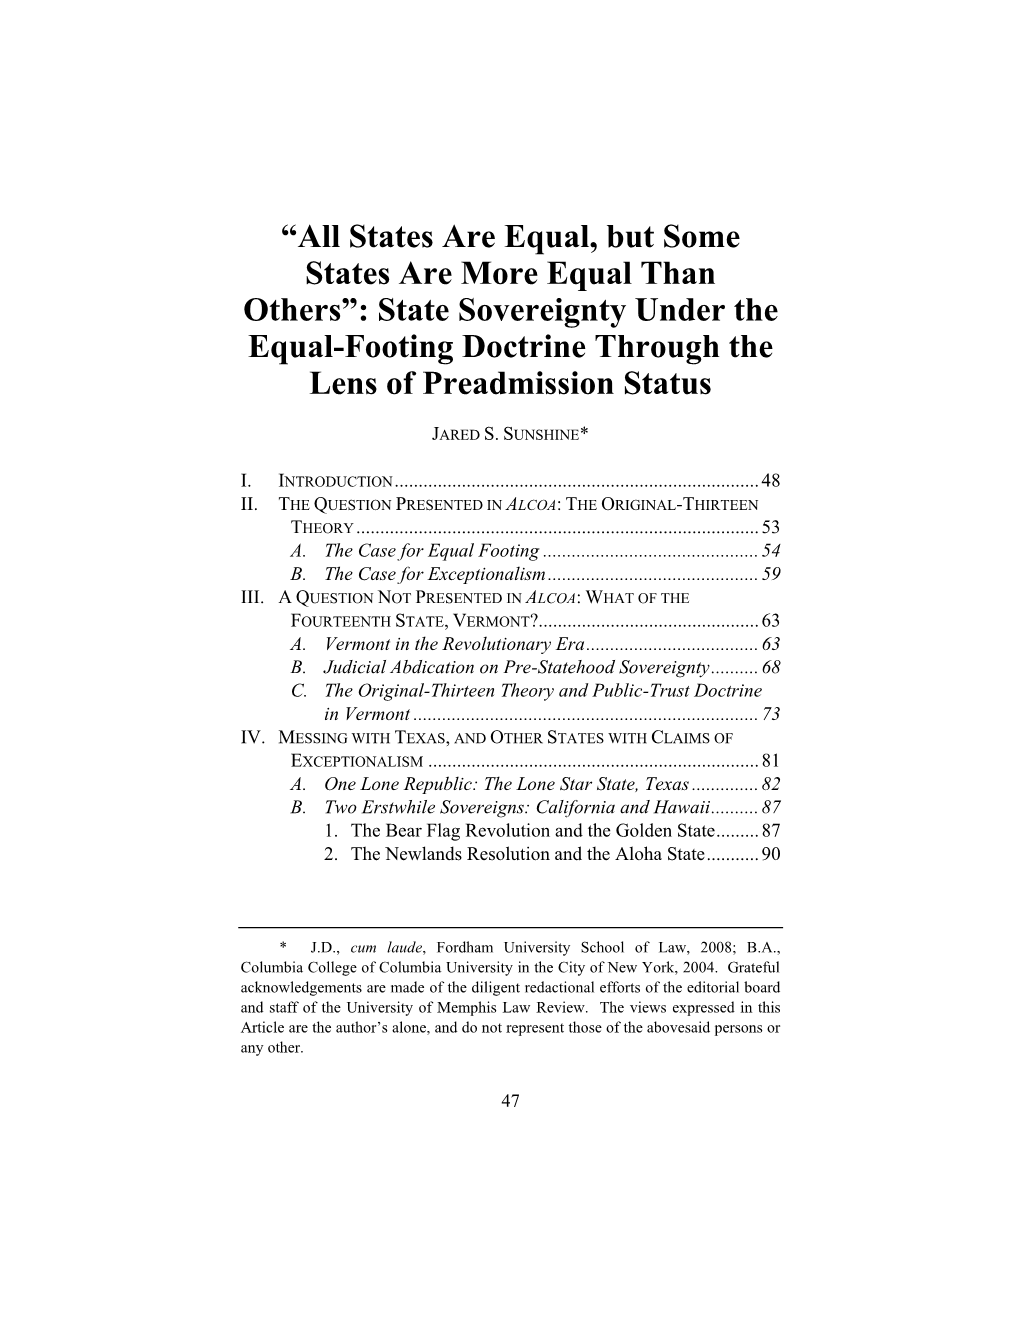 State Sovereignty Under the Equal-Footing Doctrine Through the Lens of Preadmission Status